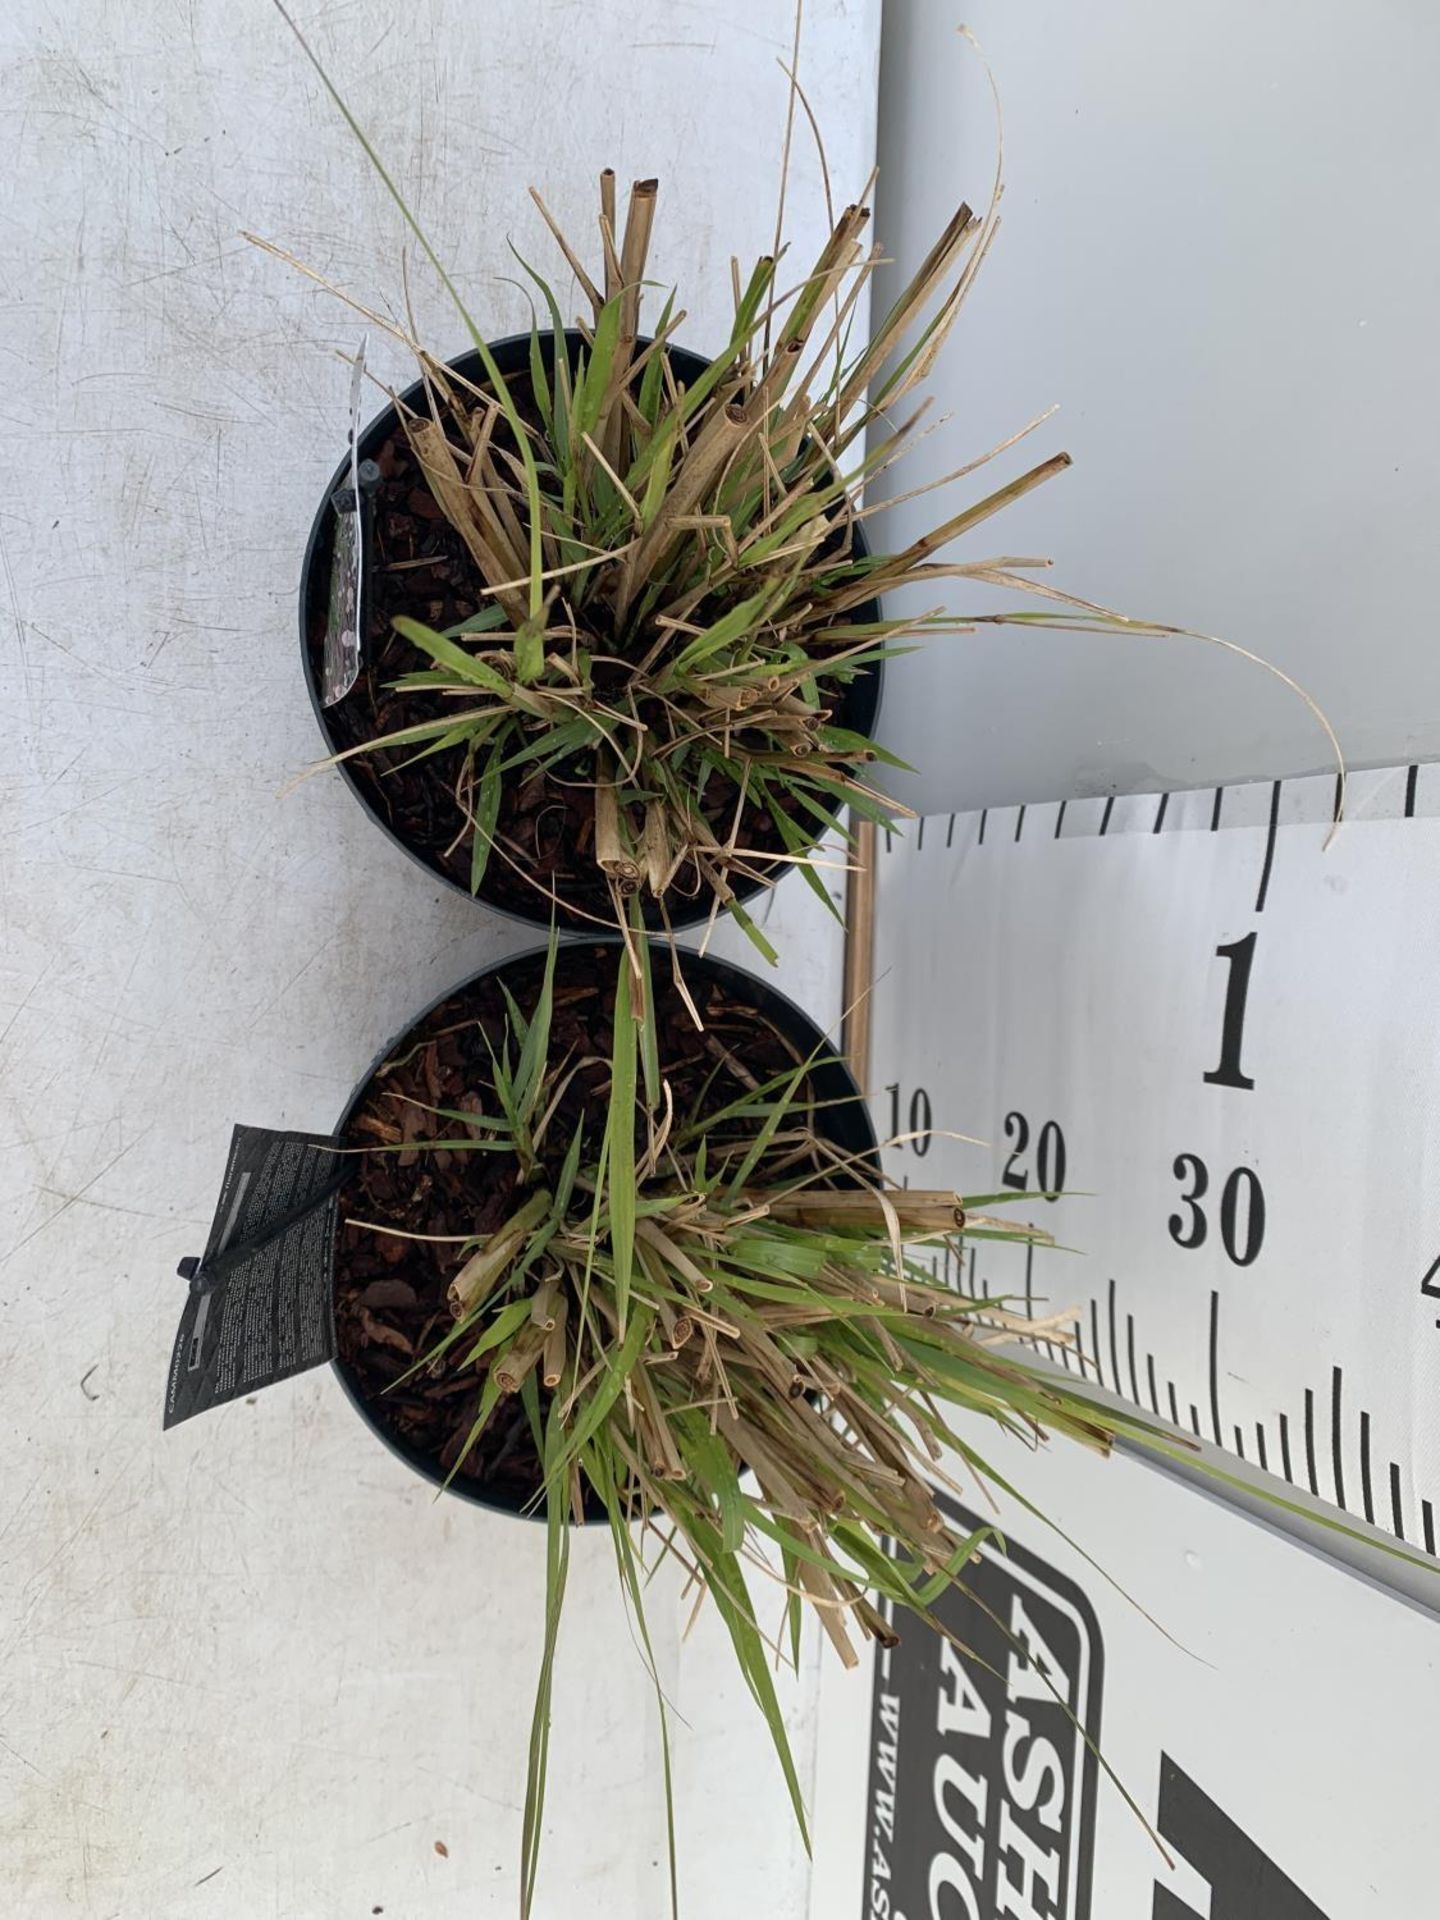 TWO ORNAMENTAL GRASSES PENNISETUM 'REDHEAD' IN 4 LTR POTS APPROX 60CM IN HEIGHT PLUS VAT TO BE - Image 4 of 8